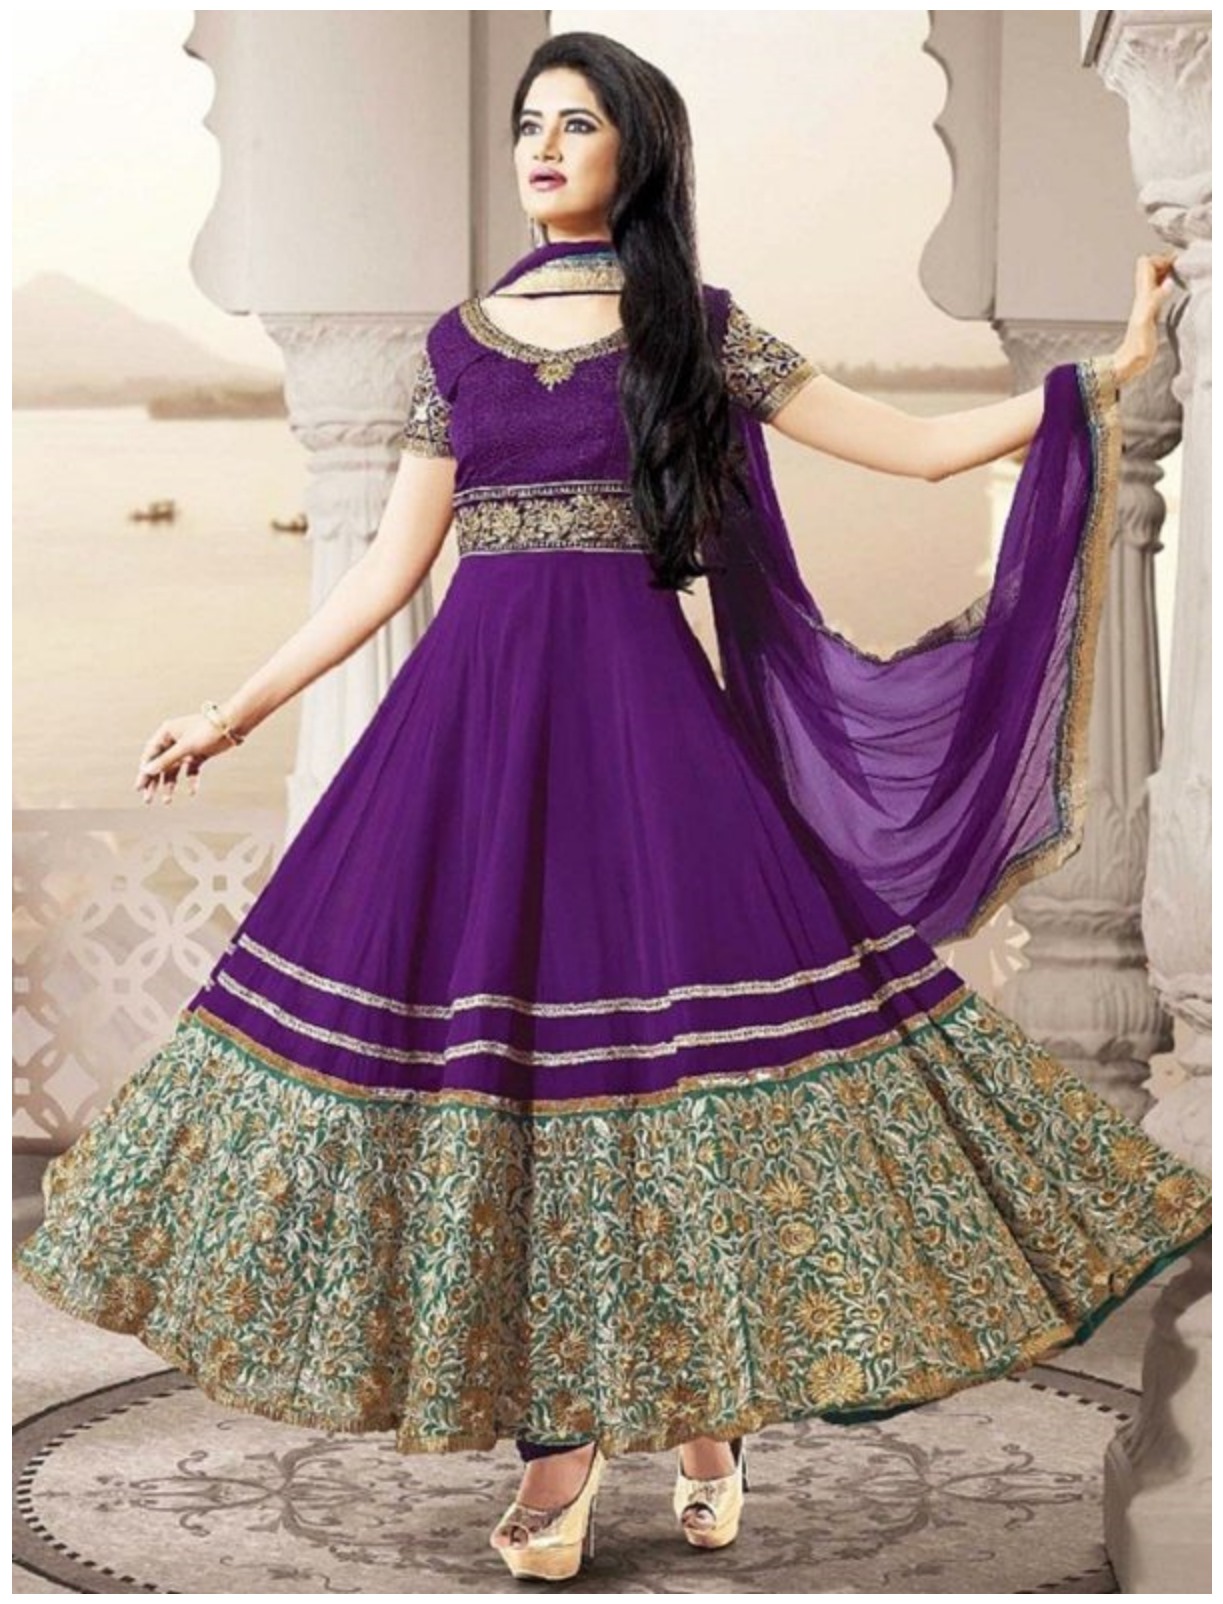 New) Party Wear Gown Dress Design 2021 Latest [40% OFF]